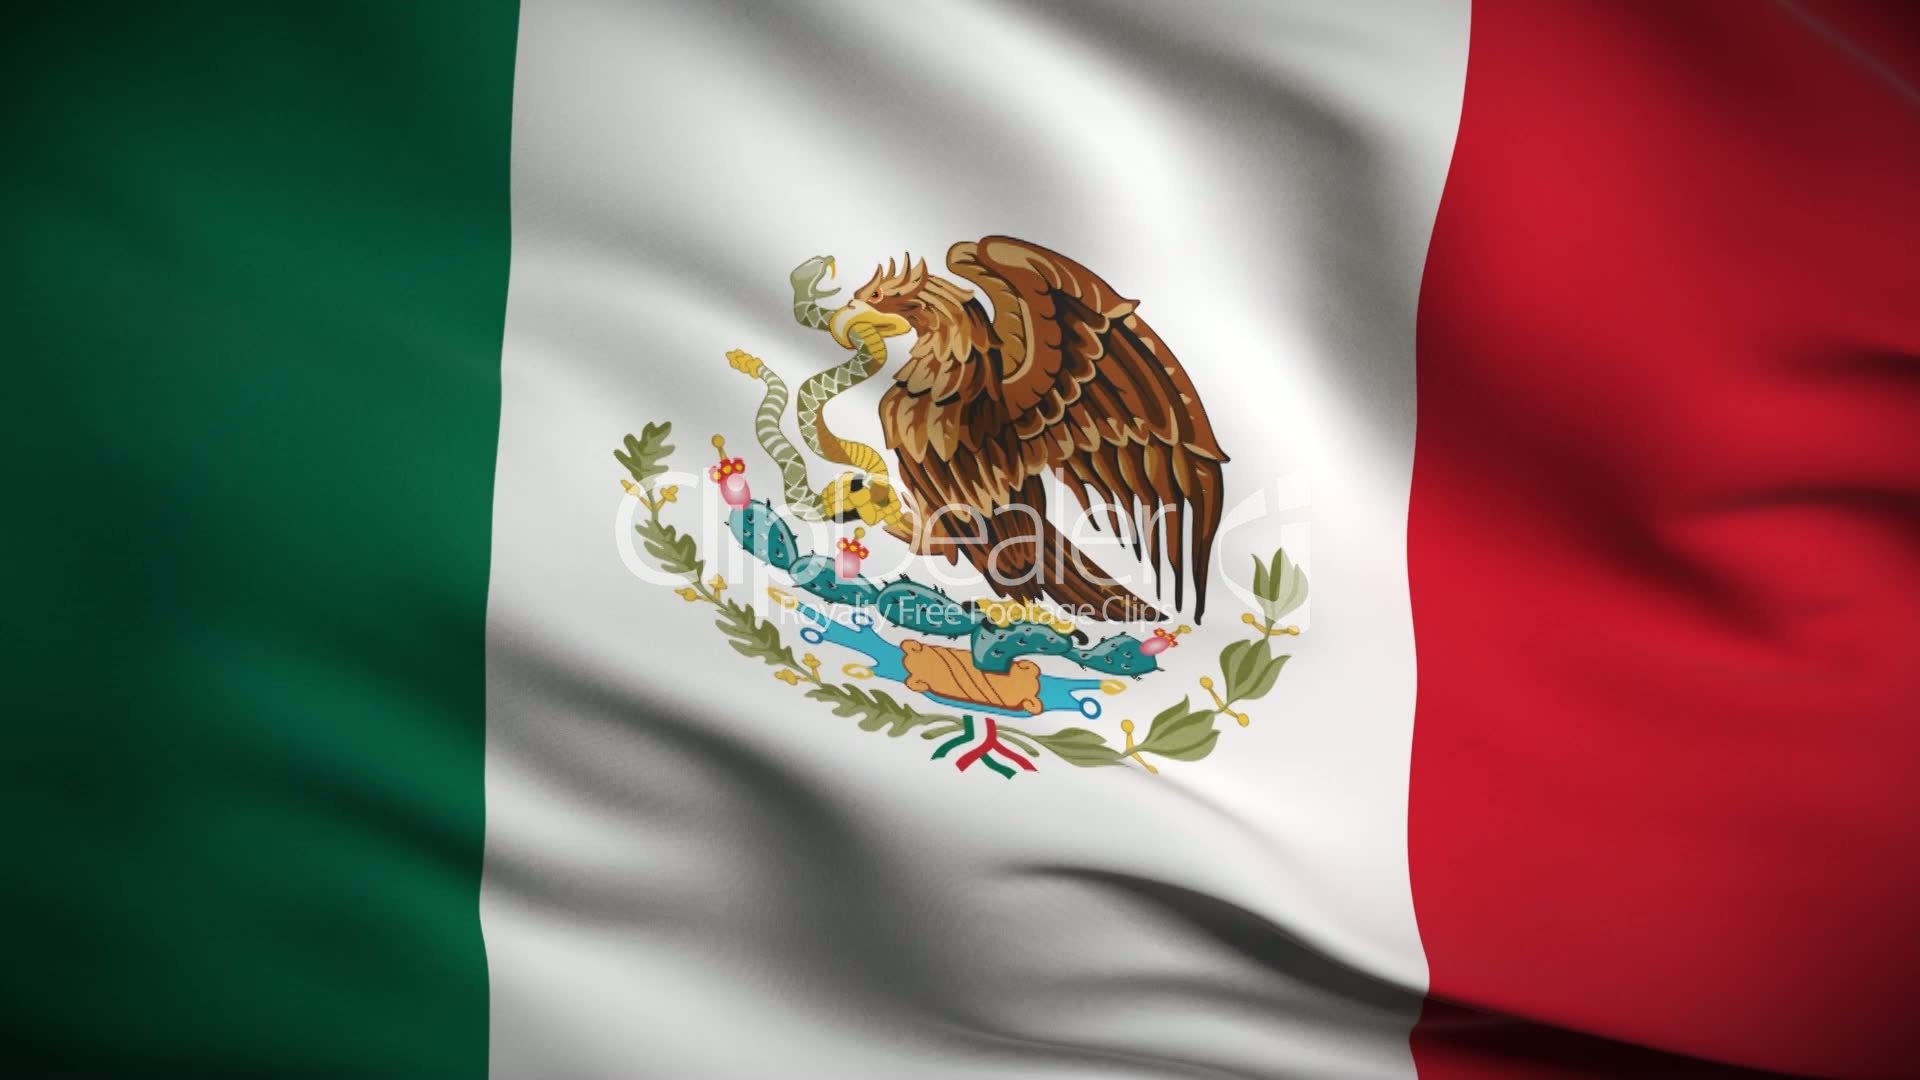 1920x1080 Mexico Flag Wallpaper | HD Wallpapers | Pinterest | Mexico flag and  Wallpaper